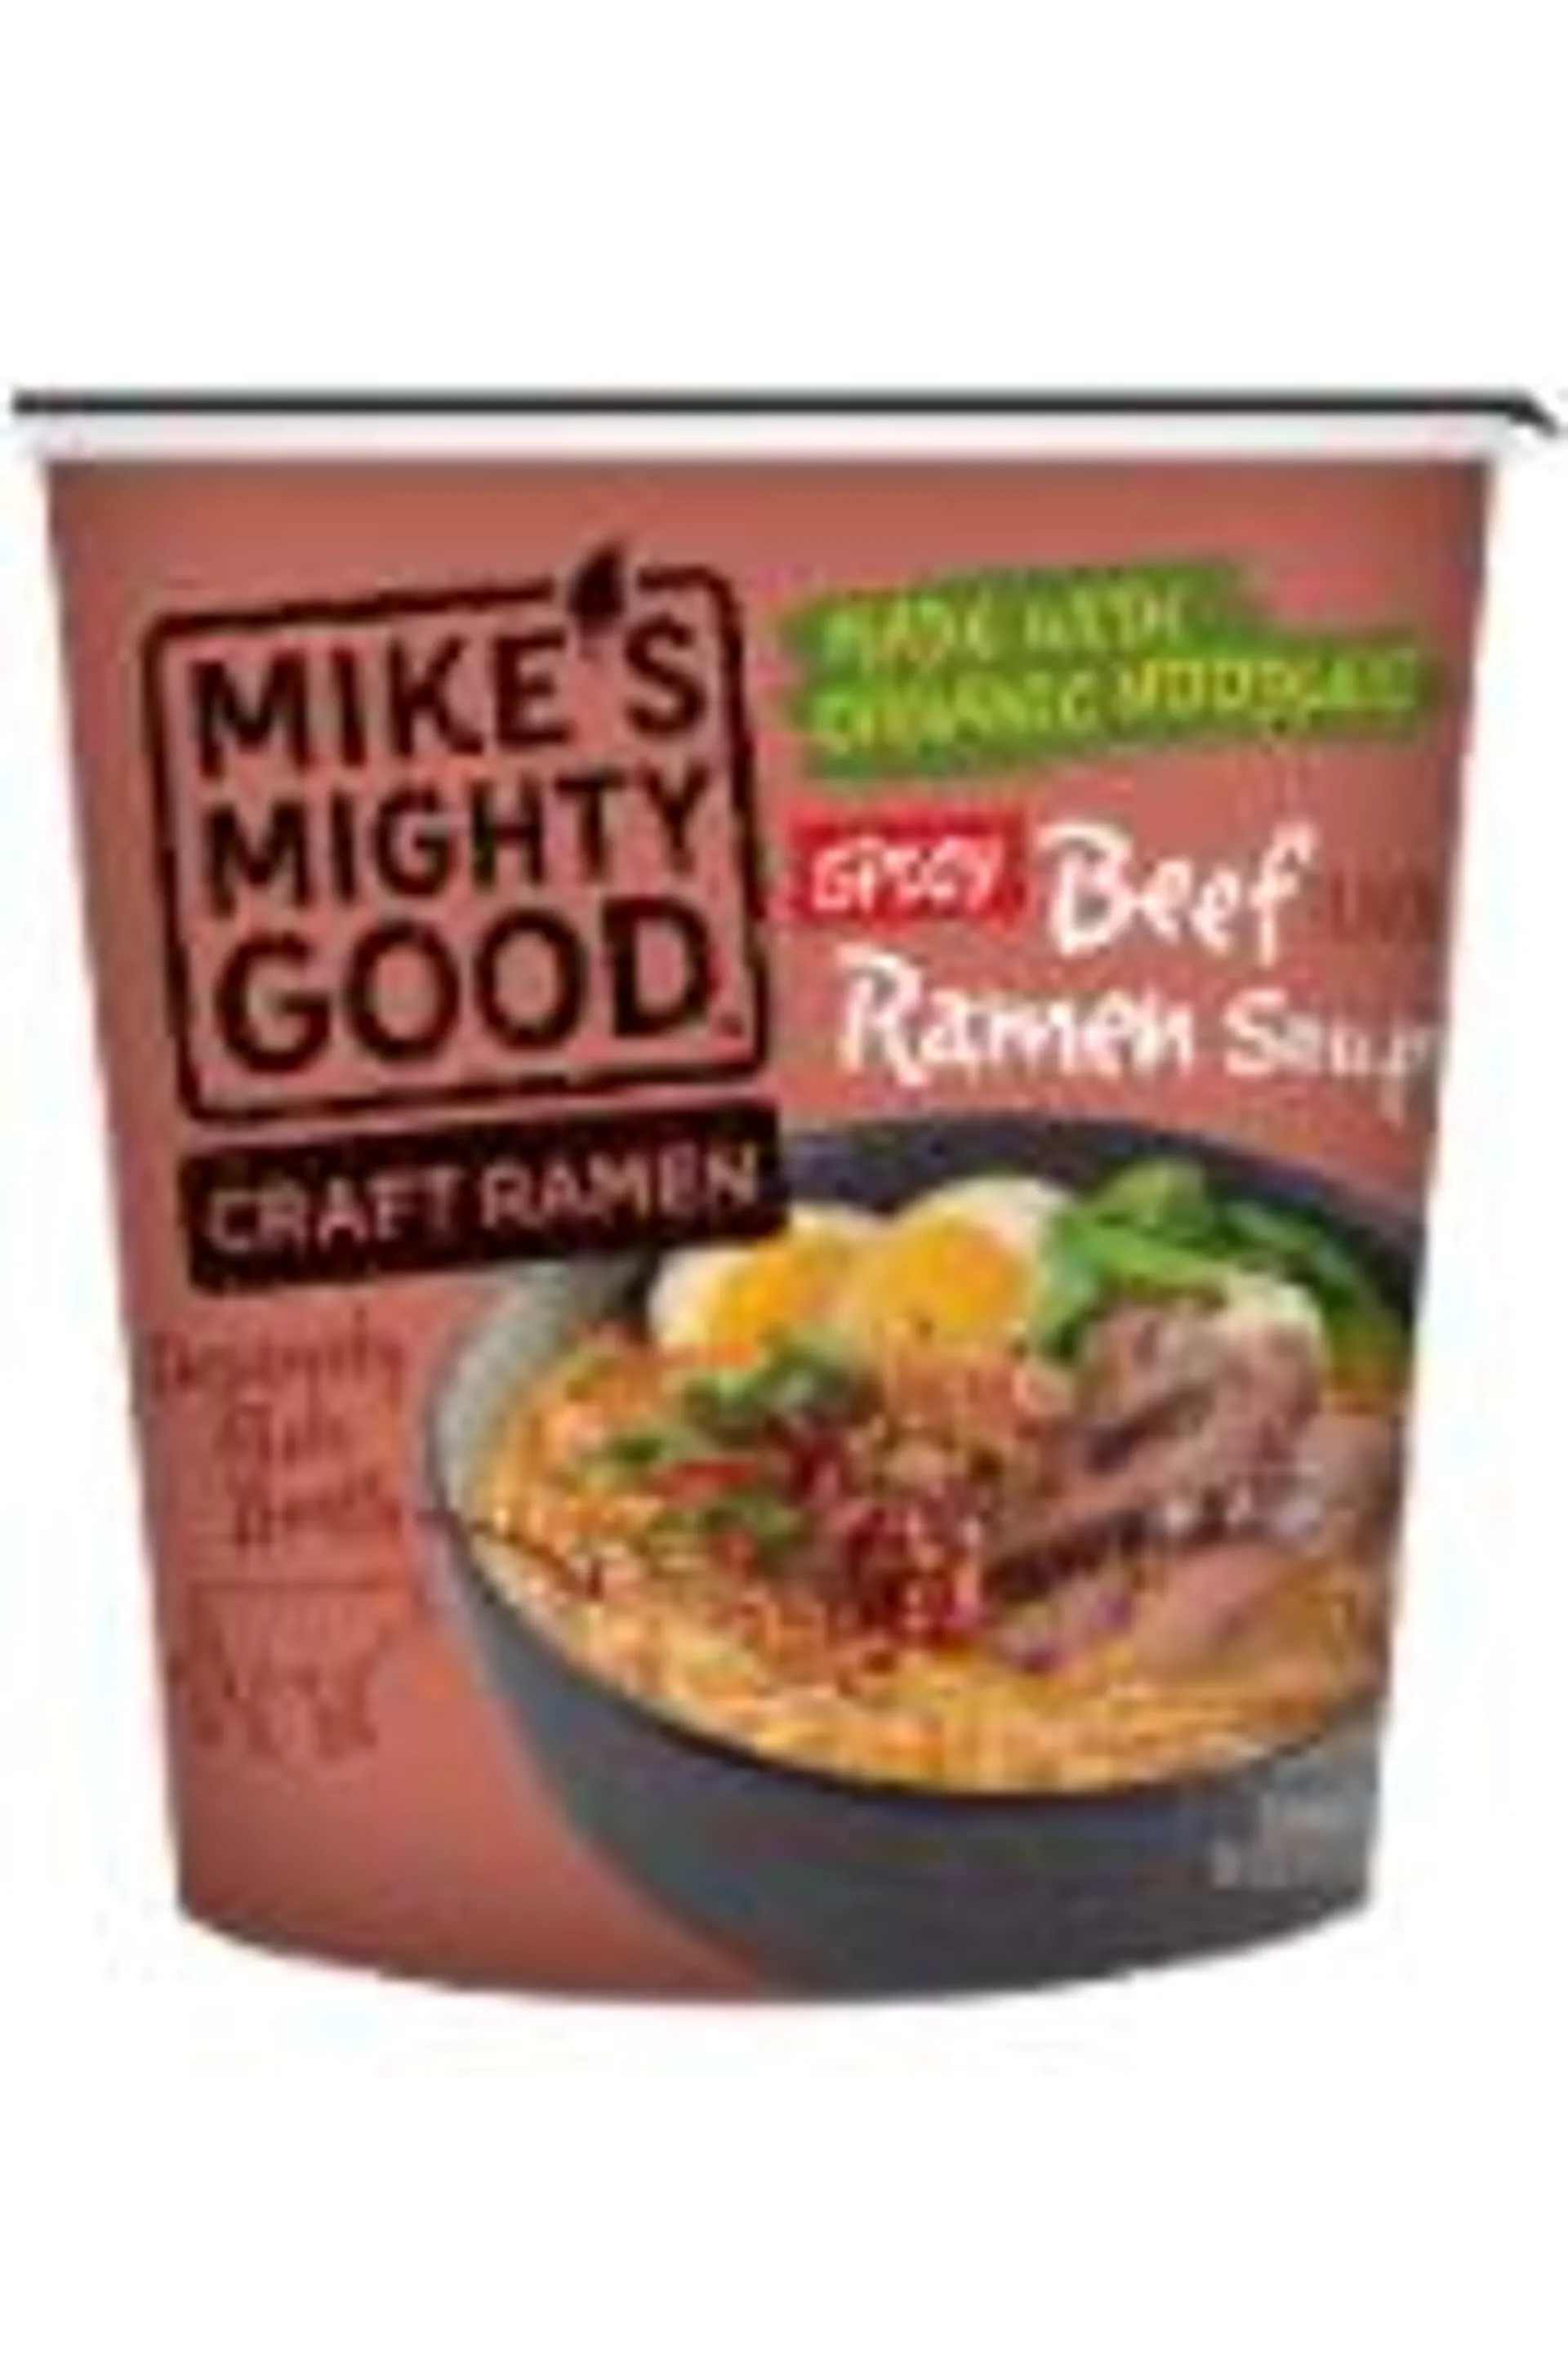 Mike's Mighty Good™ Spicy Beef Ramen Soup